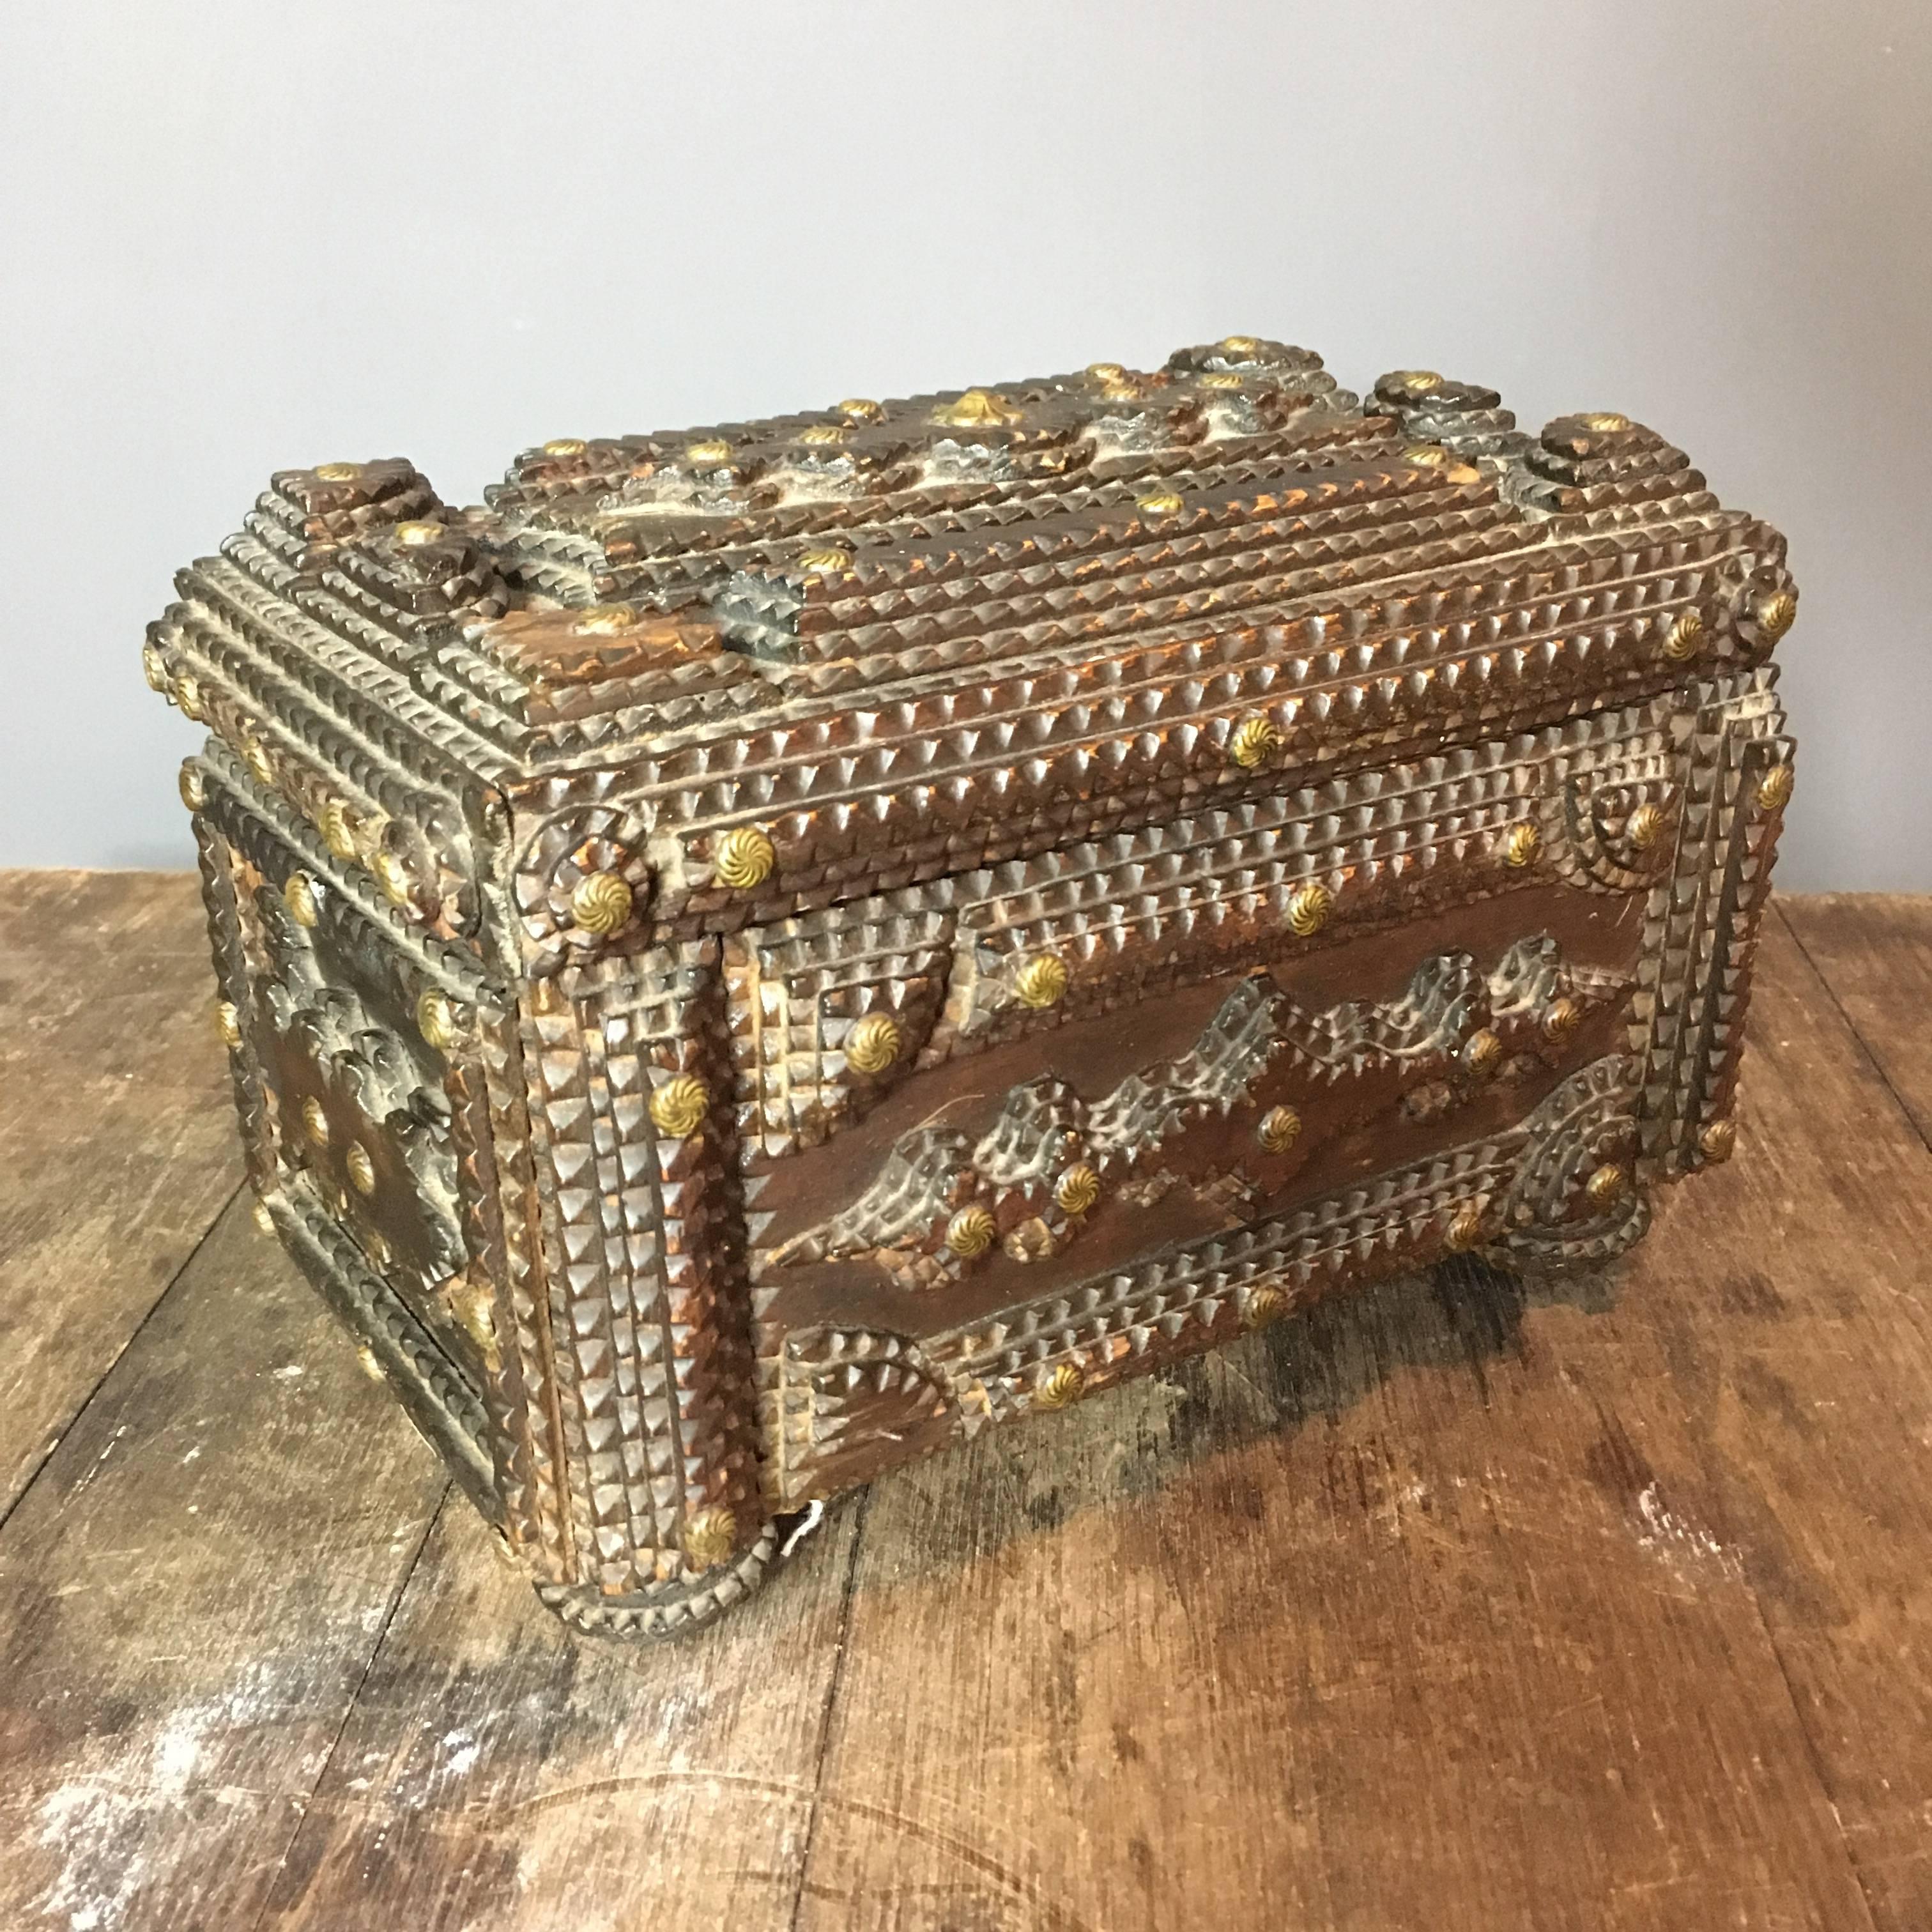 Fantastic example of a Tramp Art keepsake box

The box has been carved beautifully and detailed with small brass decorative studs

Inside the box lid is an original photograph, this could be the maker or family members, we don't know but it was